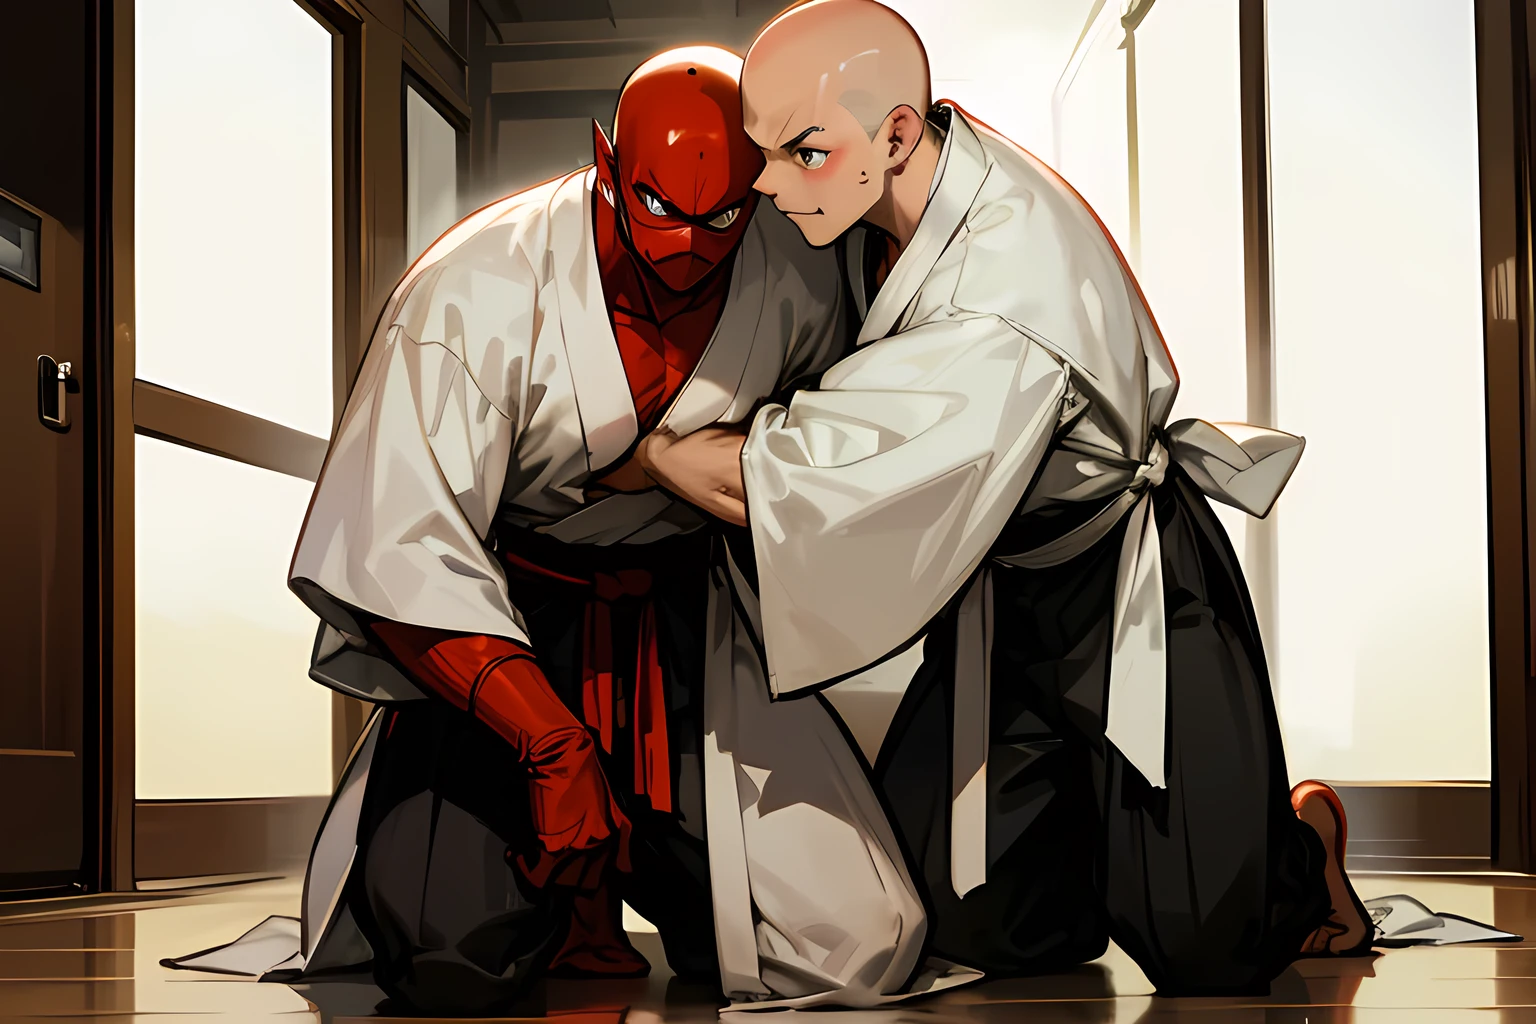 NSFW, white hakama, white Mask, white kimono, bald-headed, 3-people, Gay, brothers, Two 12-year-old Asian tweenager boys with shaved-head, round face, big eyes, cute, wearing clothes like a ninja but in a white kimono and Thai fisherman loose pants, white hakama, Covered head to toe in white clothes like a Japanese Ninja outfit traditional, covered Veiled face under a white fabric mask, All of them wearing white clothes only, Random sexy pose, standing, sit, roll, kneel, bound in a box, in a dimly lit room, A door is slightly open, revealing a bright hallway outside. faces Asian ninja men who kneel inside the room, intimidating, Inviting, seducing, They stare at each other in love, male-only, gay love, hugs, attractive, BDSM, bulge in pants, erection, peeping, unexpected, deep penetration, confrontation, Shonen, Shota, Moe, innocent, curiosity,